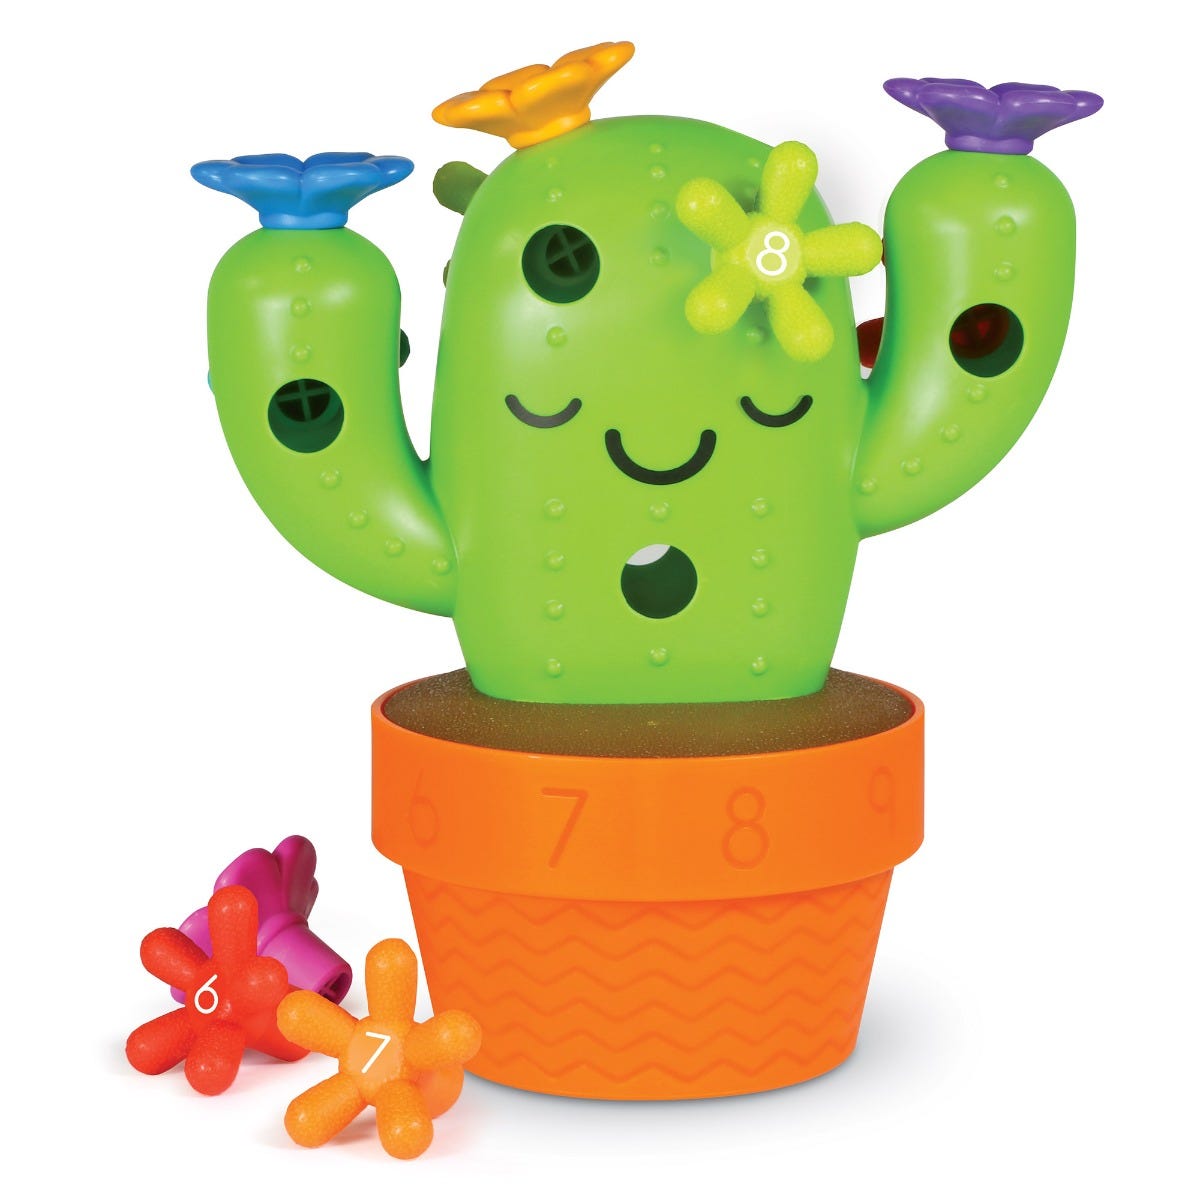 Carlos The Pop & Count Cactus, This fun Carlos The Pop & Count Cactus toy encourages little hands to grab and grow with tactile pieces made for active play. When children grab the colourful flowers and spikes and push and twist them into Carlos the Pop & Count Cactus, they develop strength in the wrist, thumb, and forefinger. This helps them build the hand strength and coordination they need to do fine motor-dependent tasks such as feeding themselves and getting dressed. Grow early years skills with Carlos 